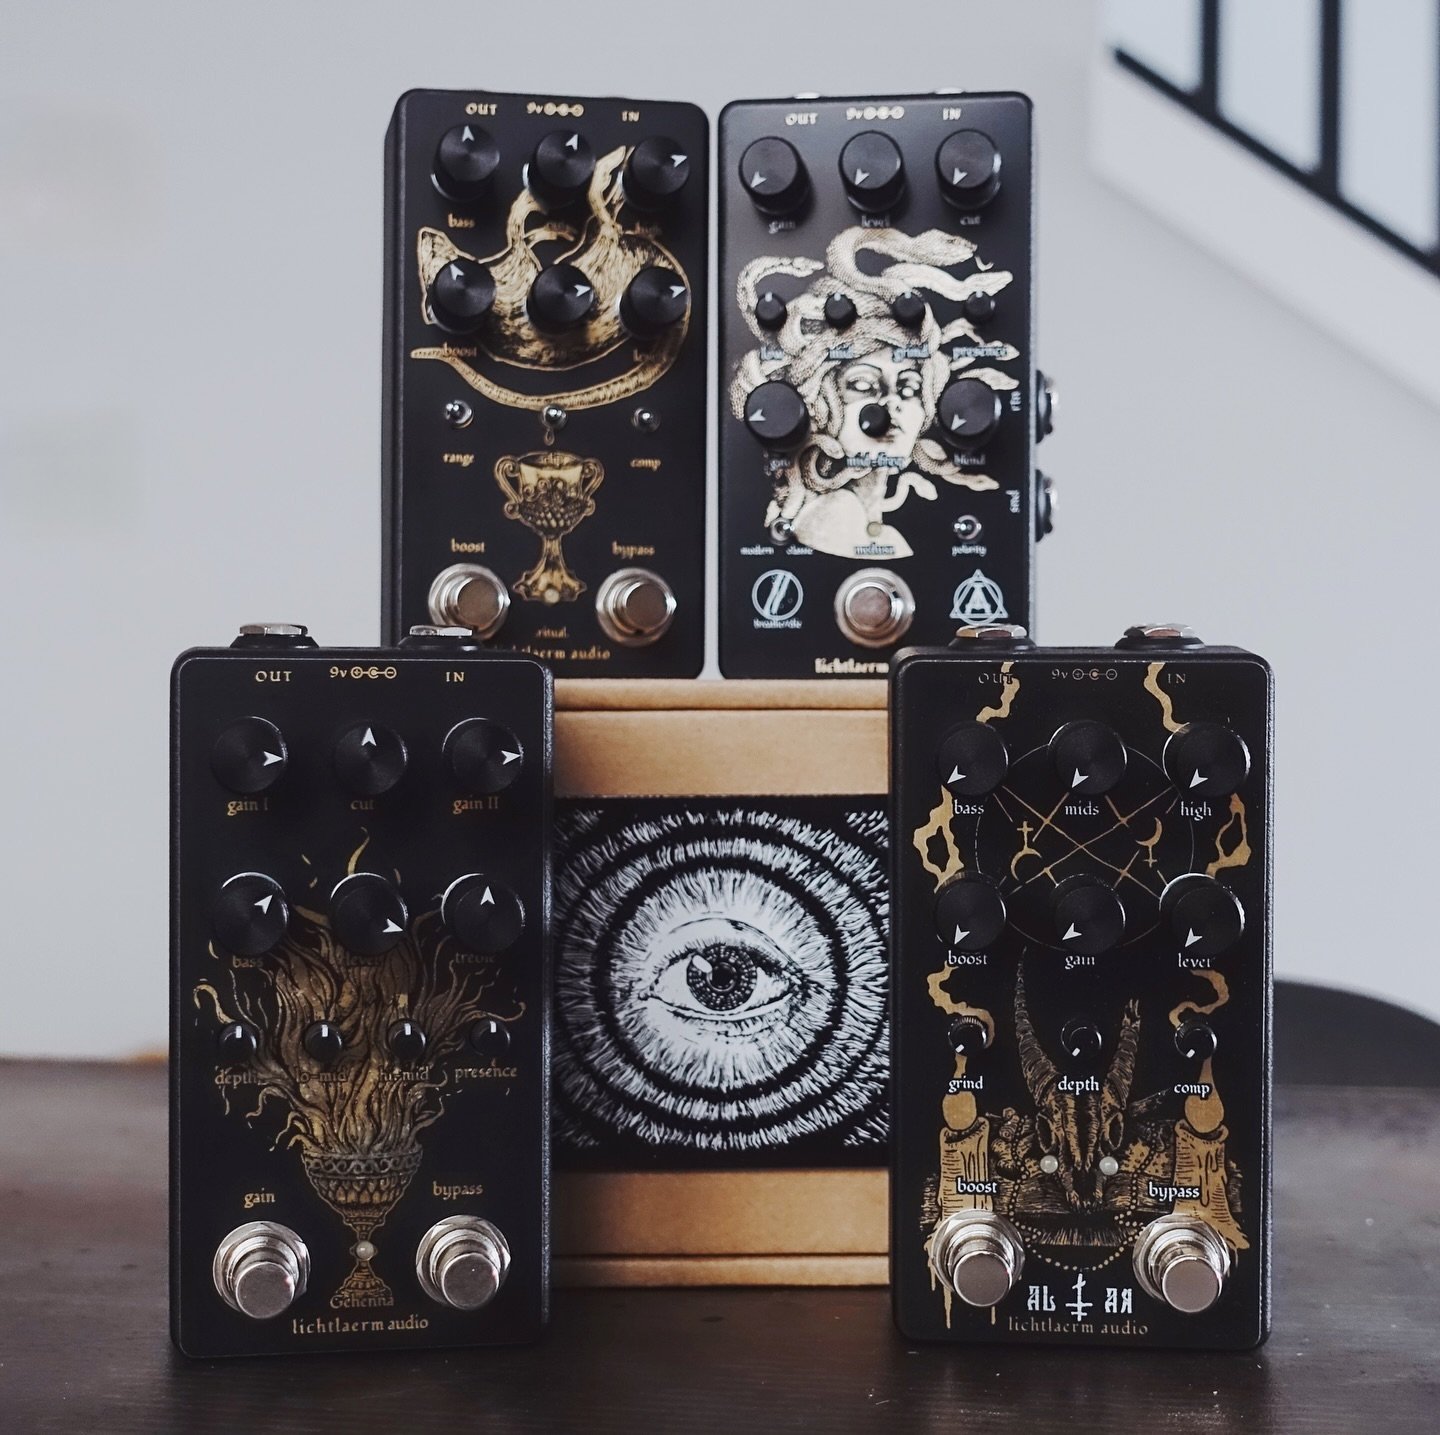 We just rest&oslash;cked a bunch of Lichtlaerm pedals, including the Medusa, Key &amp; The Gate, Altar, Untiefe and more. You know where!

But looking at my inbox, you're already on it and grabbing them faster than we can put them up...

#lichtlaerma